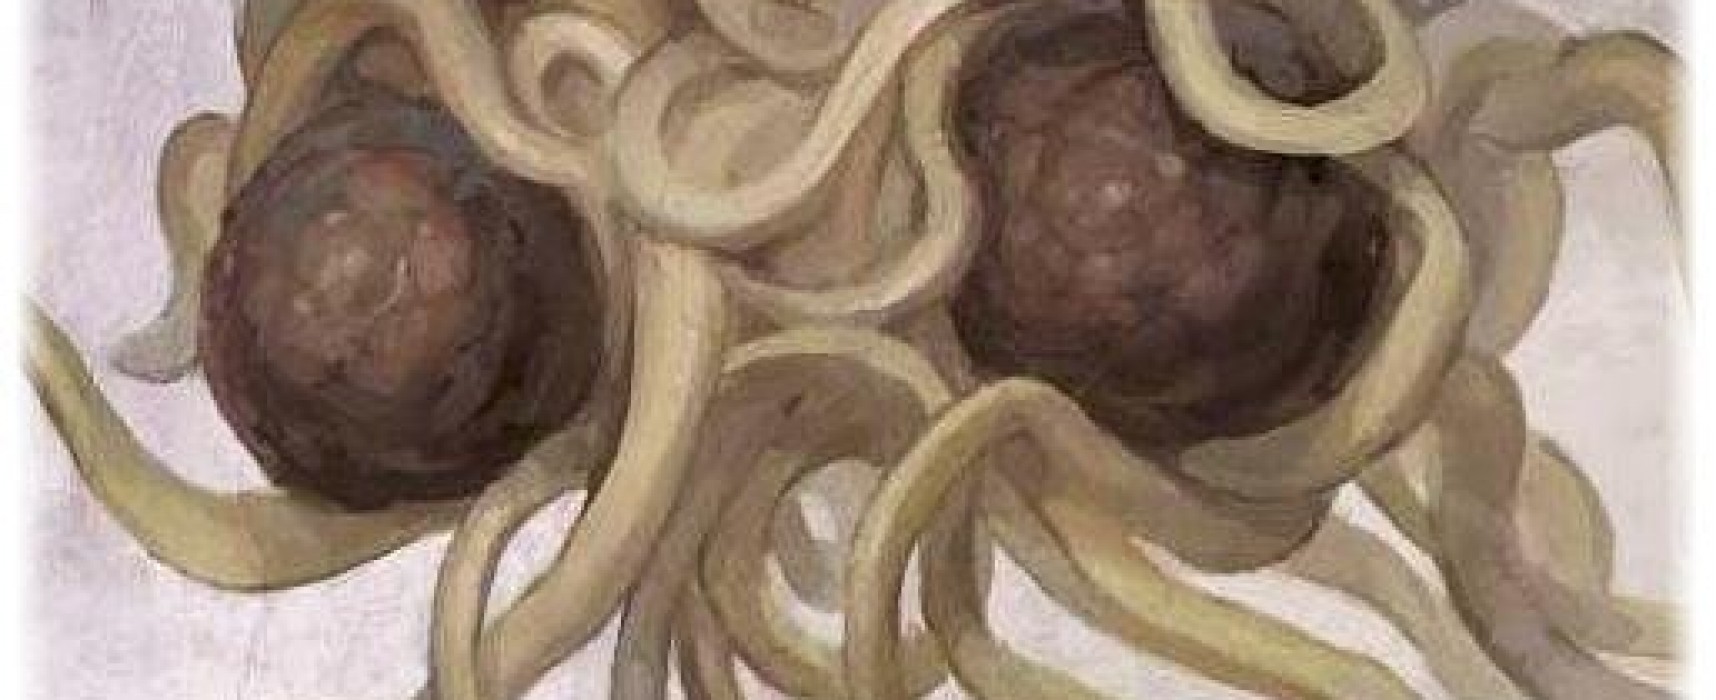 Pastafarianism: All Hail His Noodliness